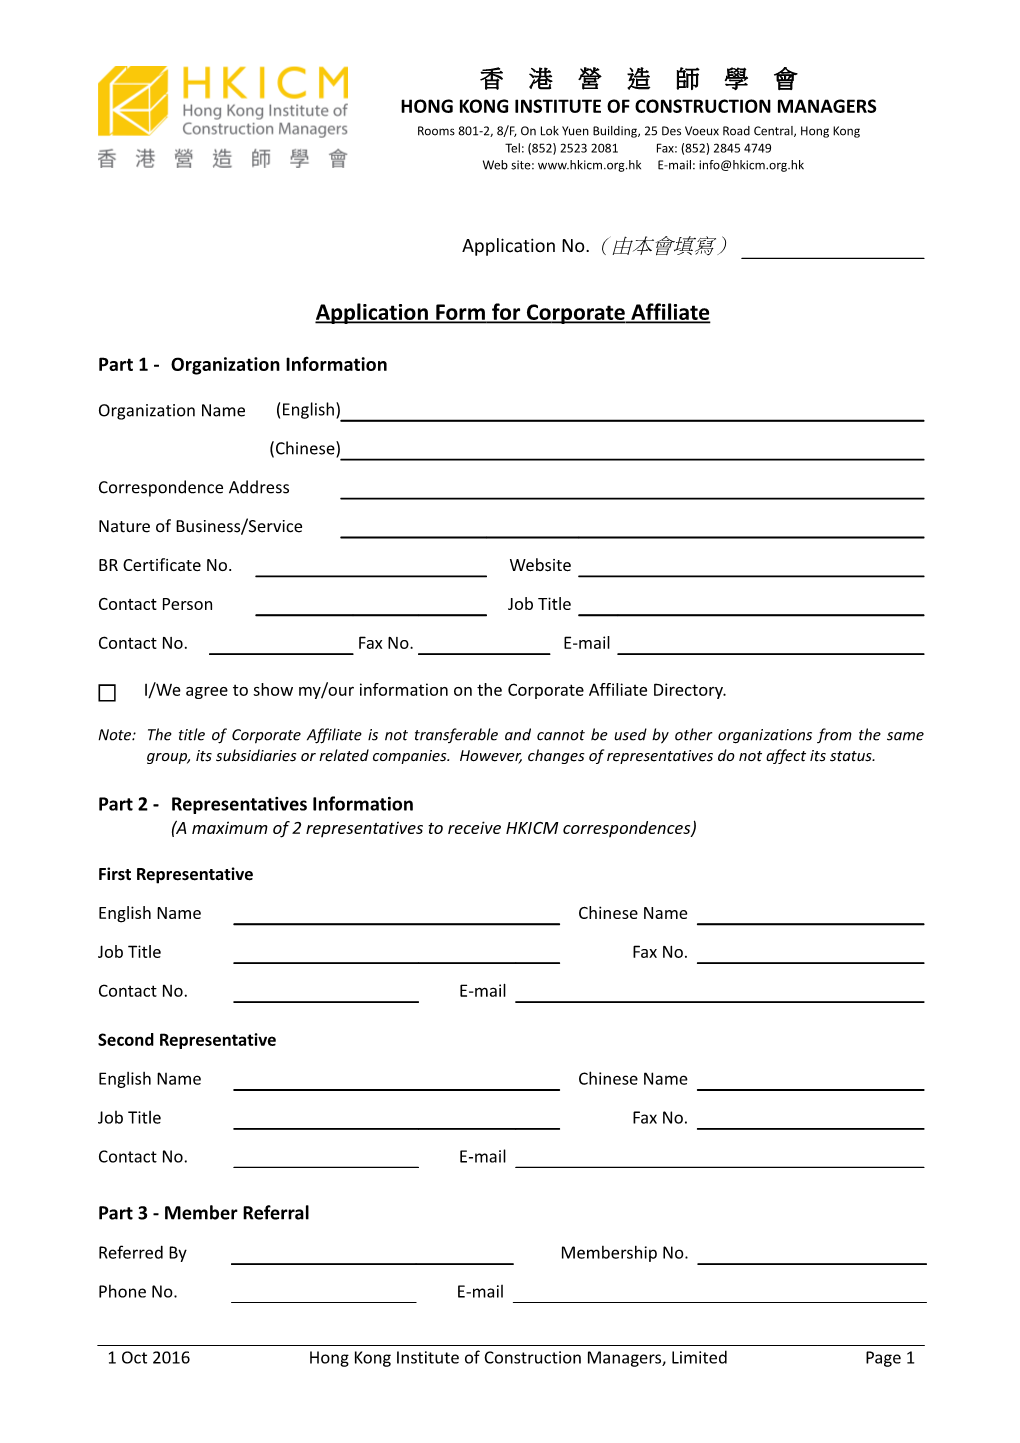 Application Form for Corporate Affiliate